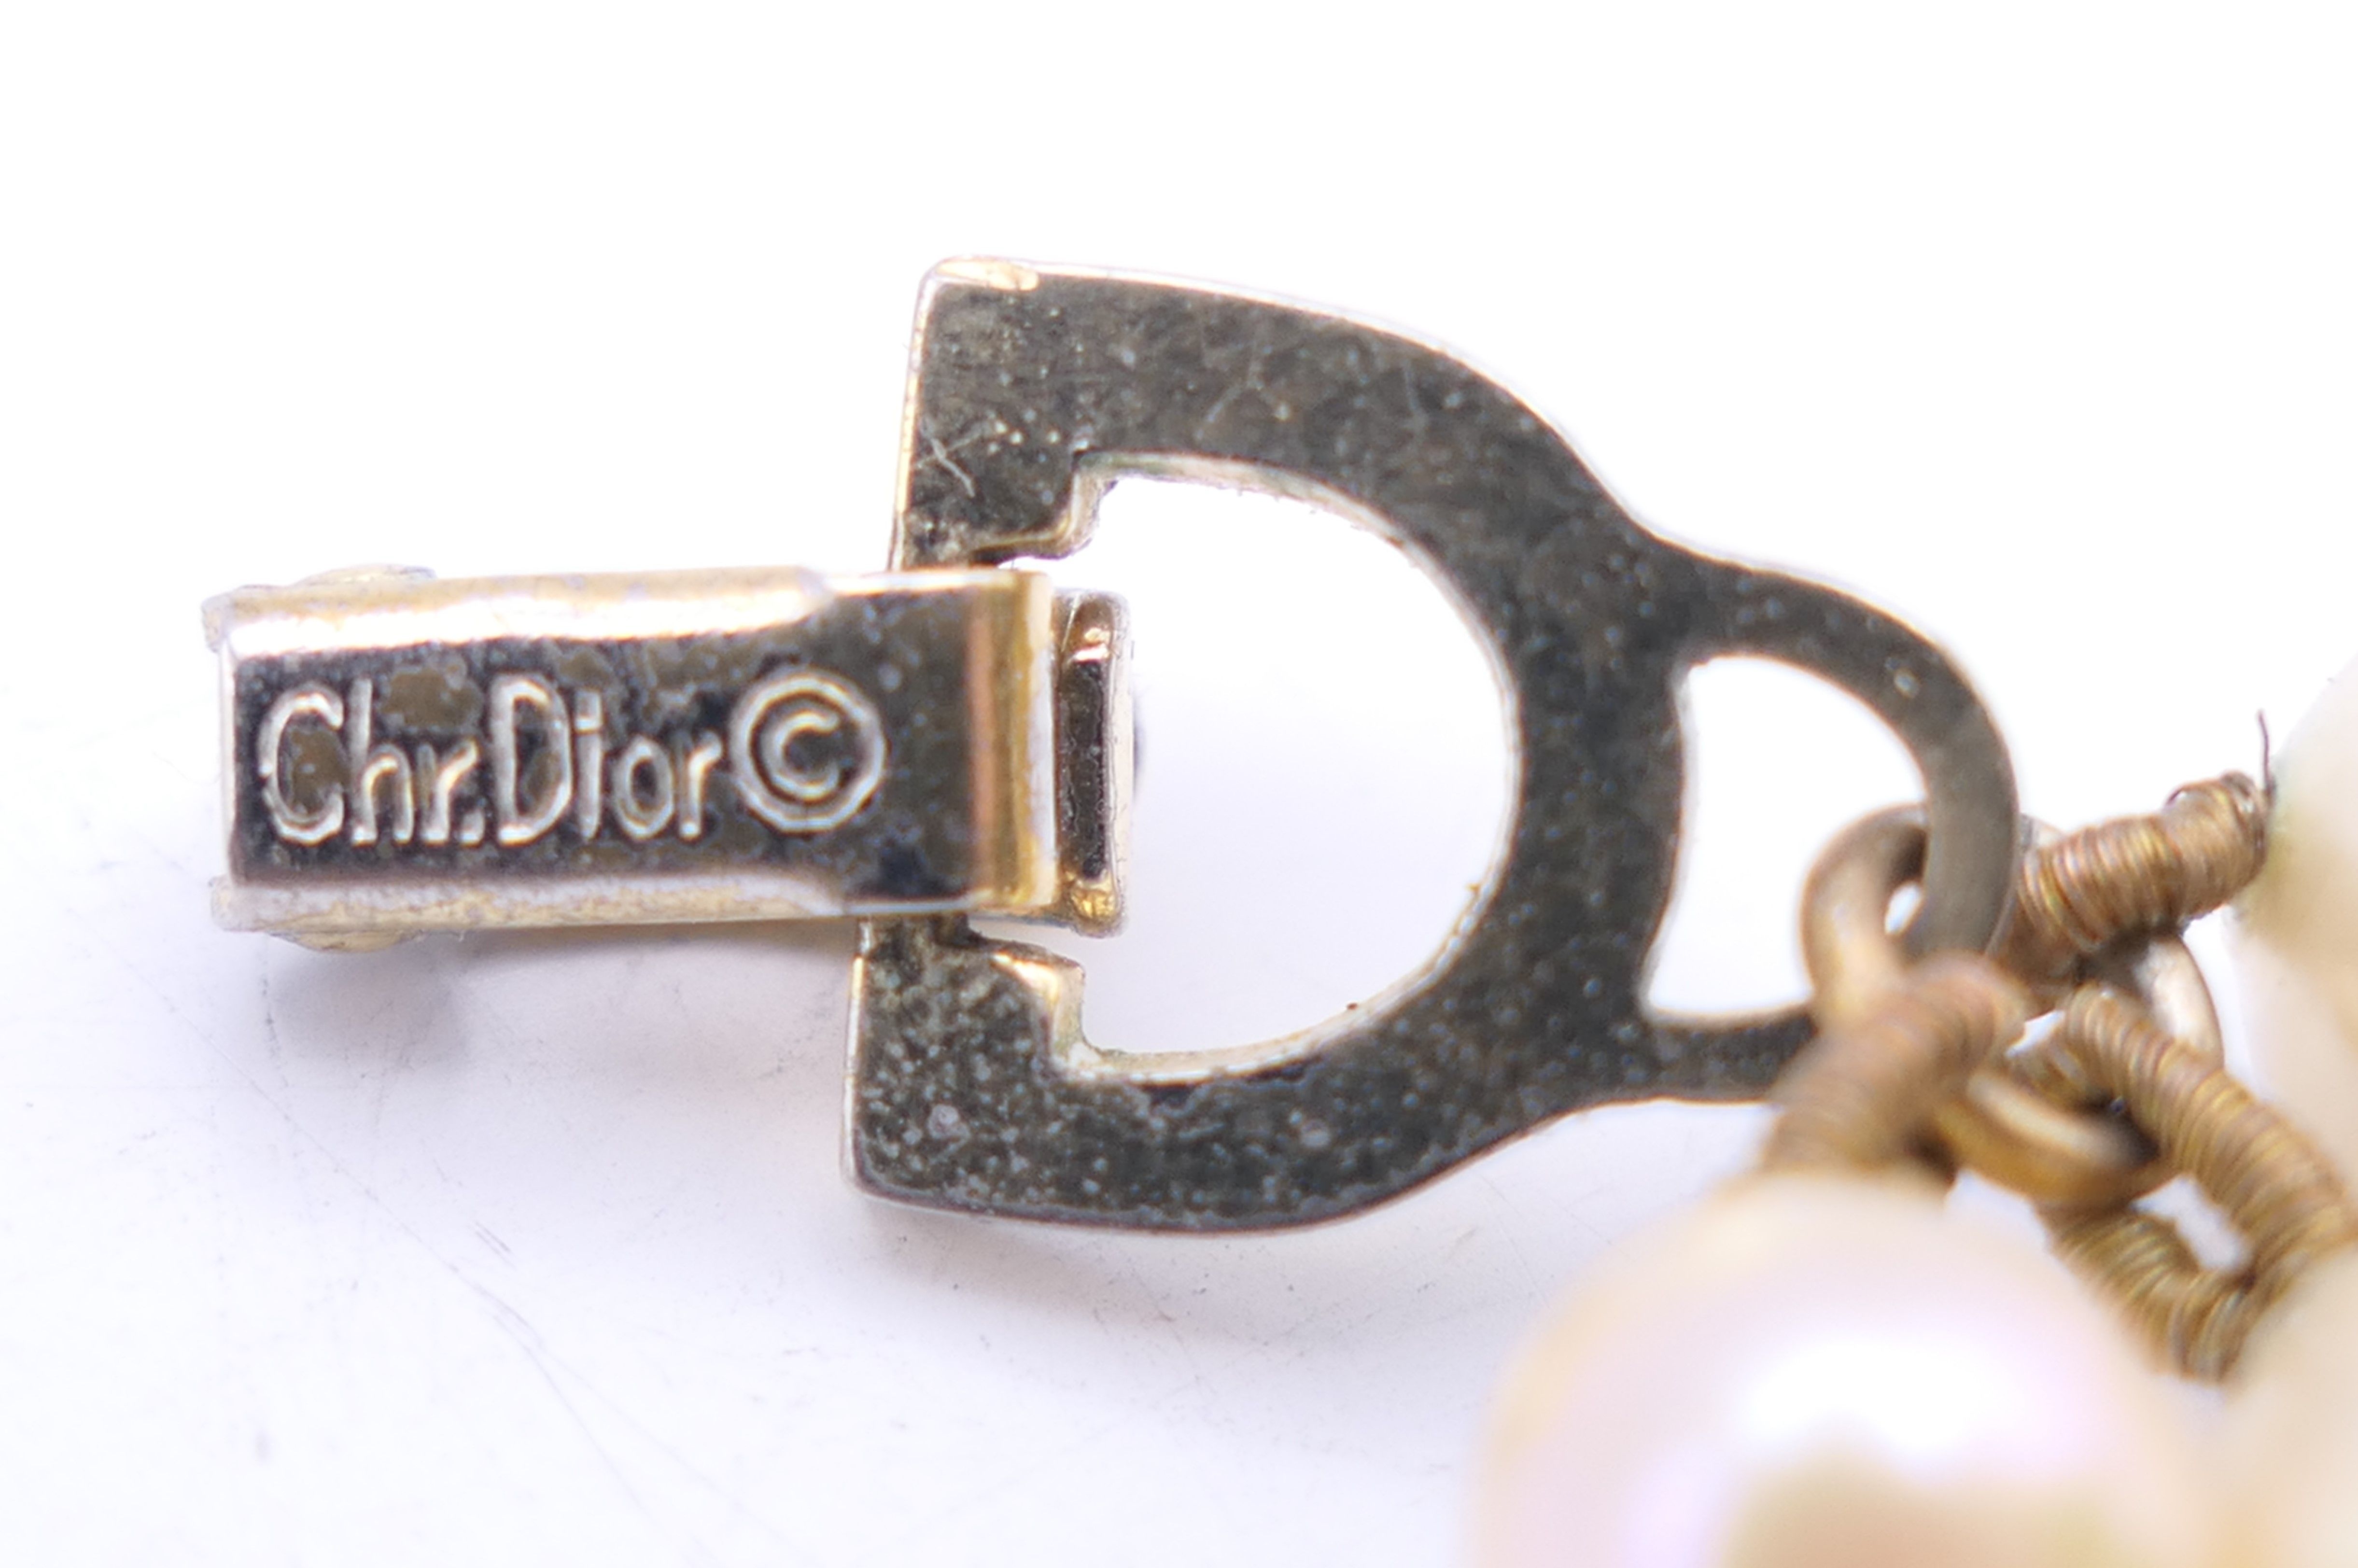 A Christian Dior choker necklace. 37 cm long. - Image 7 of 8